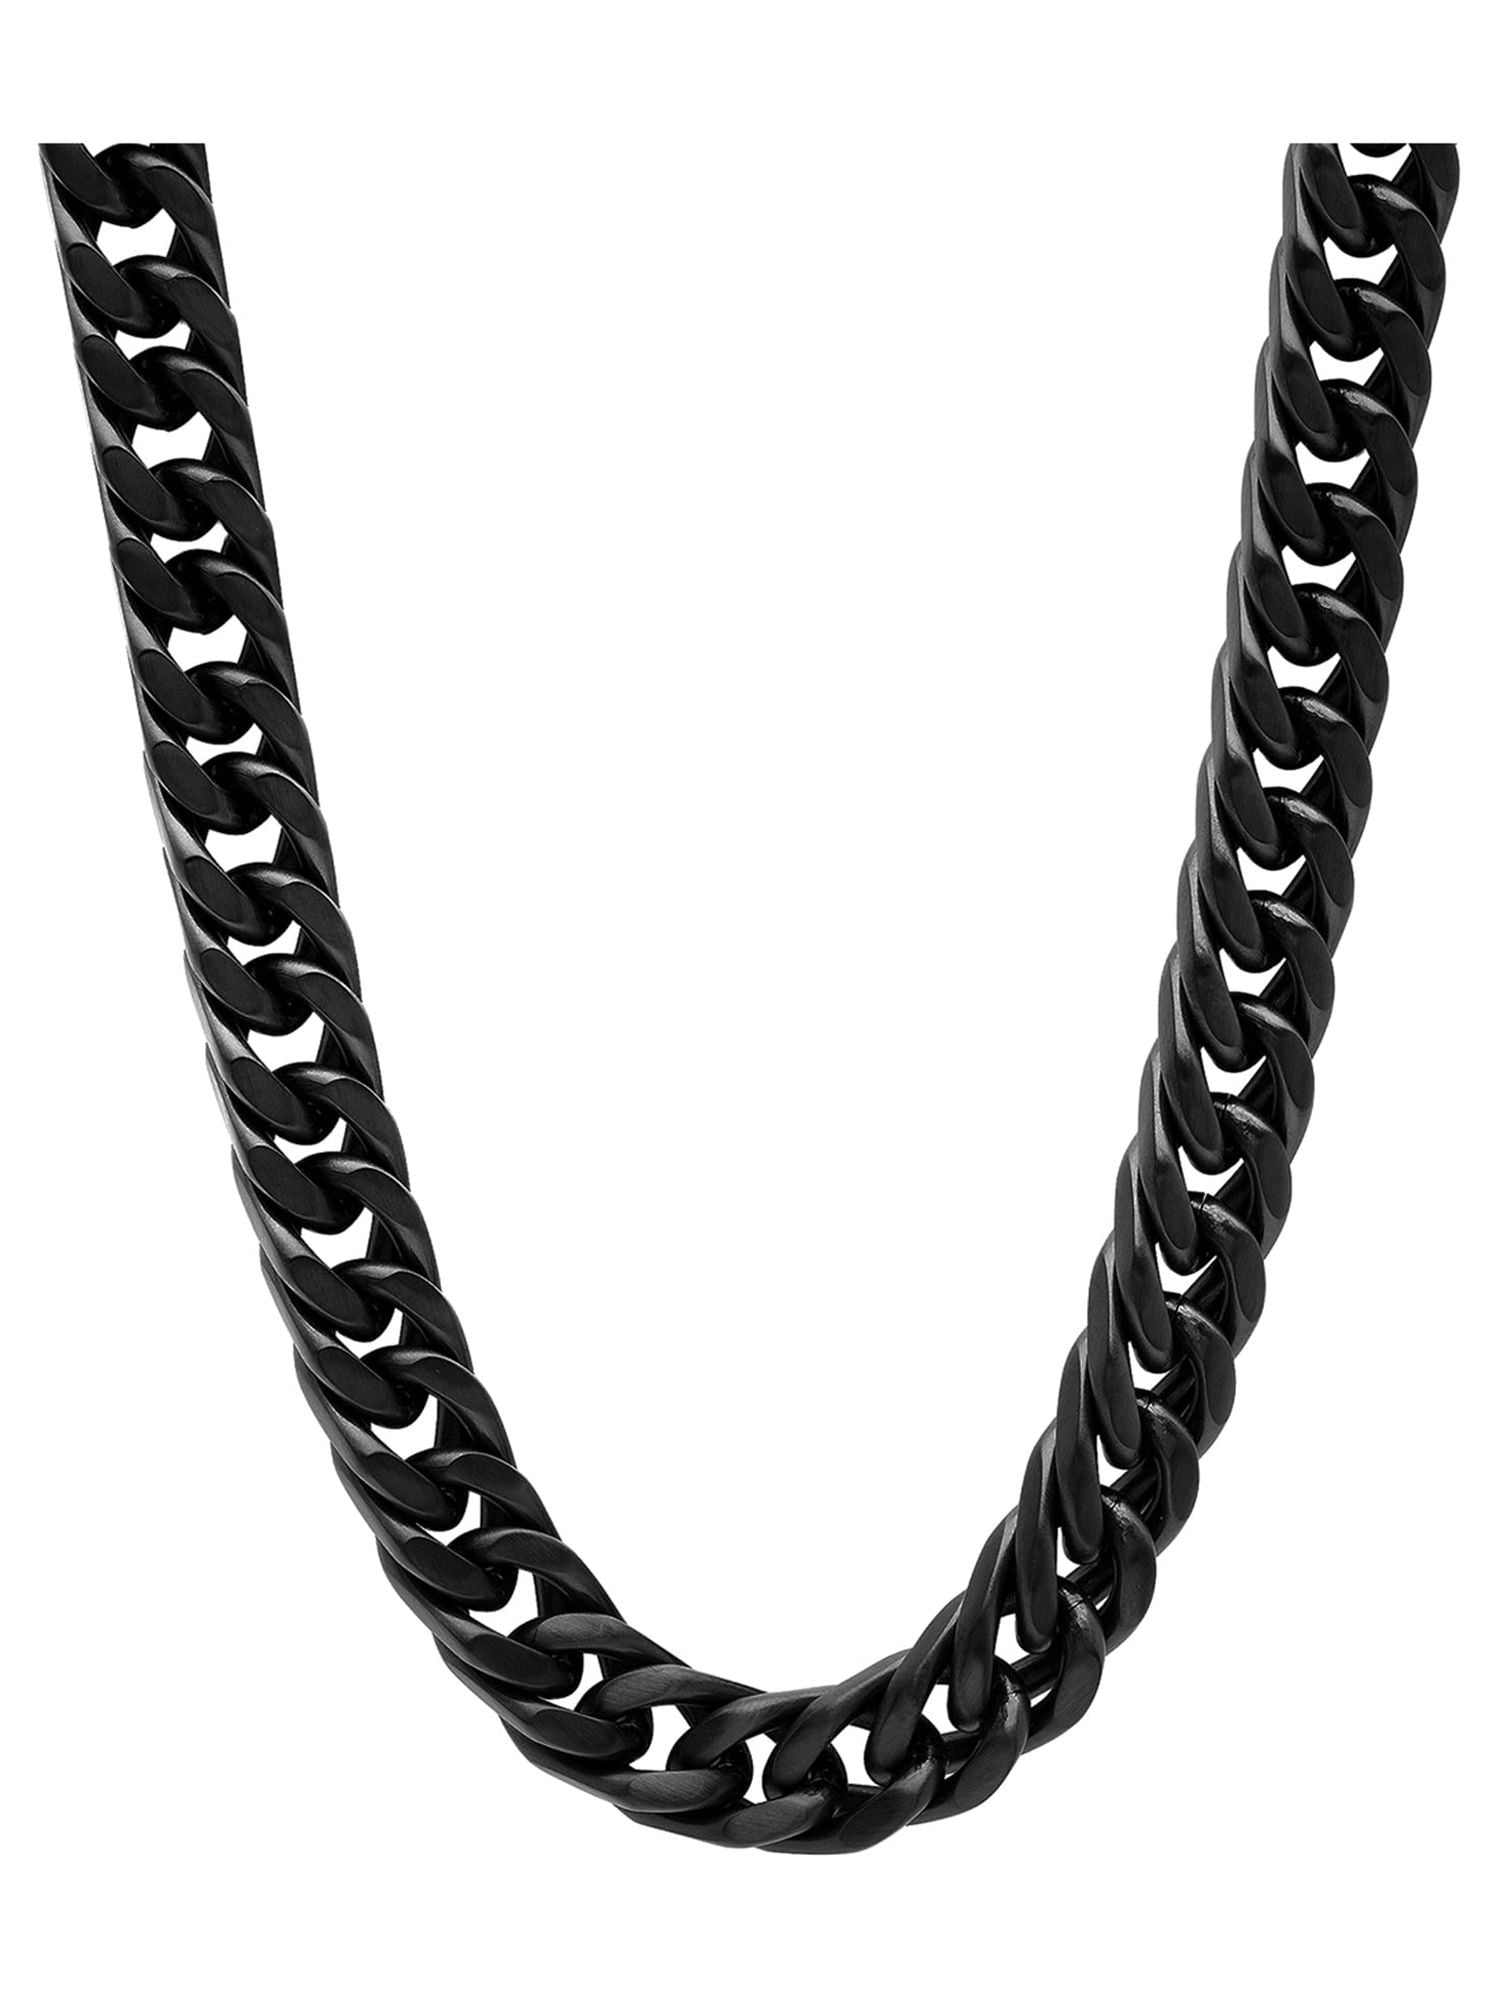 Anchor Stainless Steel Black Silver Necklace Pendant Chain For Men – ZIVOM